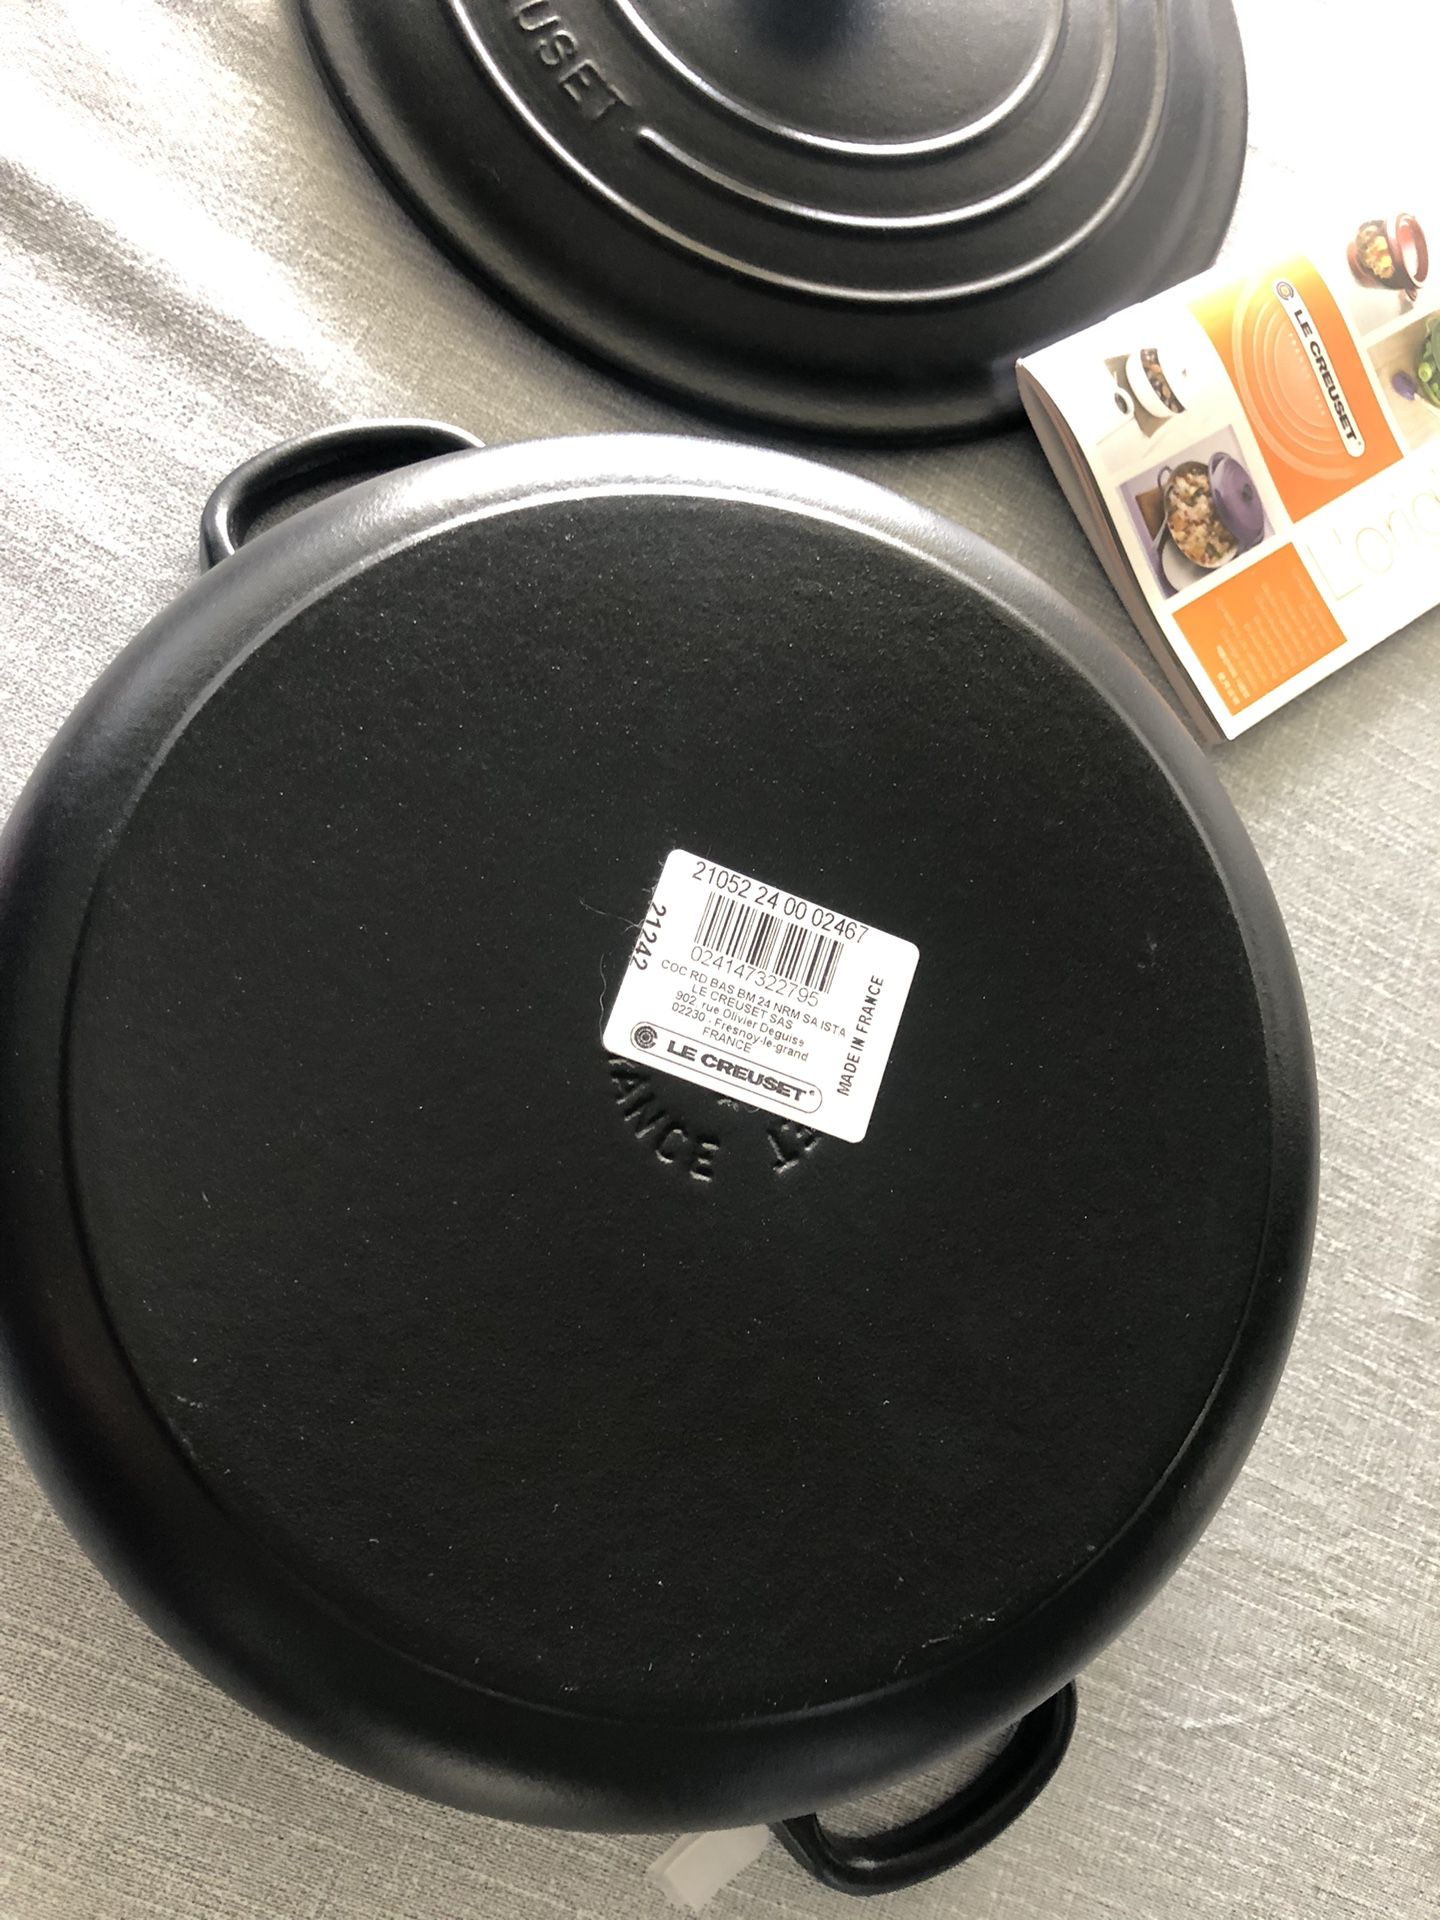 New Chefs Counter 5Qt Cast Iron Dutch Oven for Sale in Artesia, CA - OfferUp